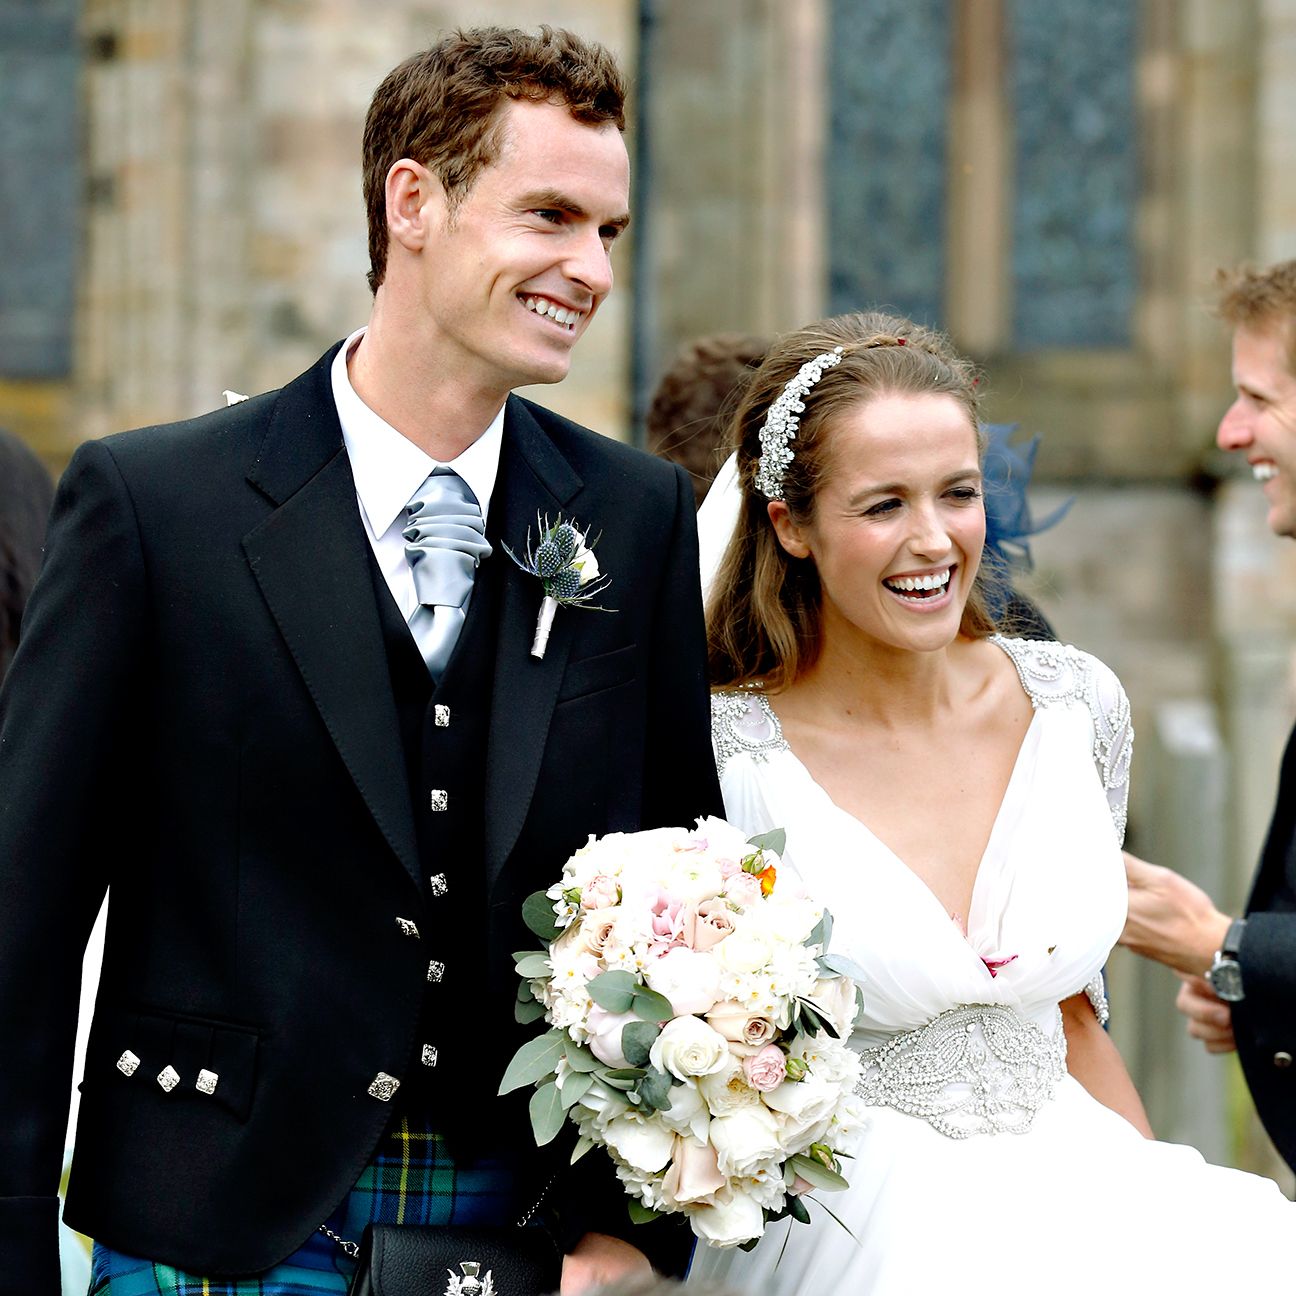 Andy Murray, wife expecting first child early next year1296 x 1296